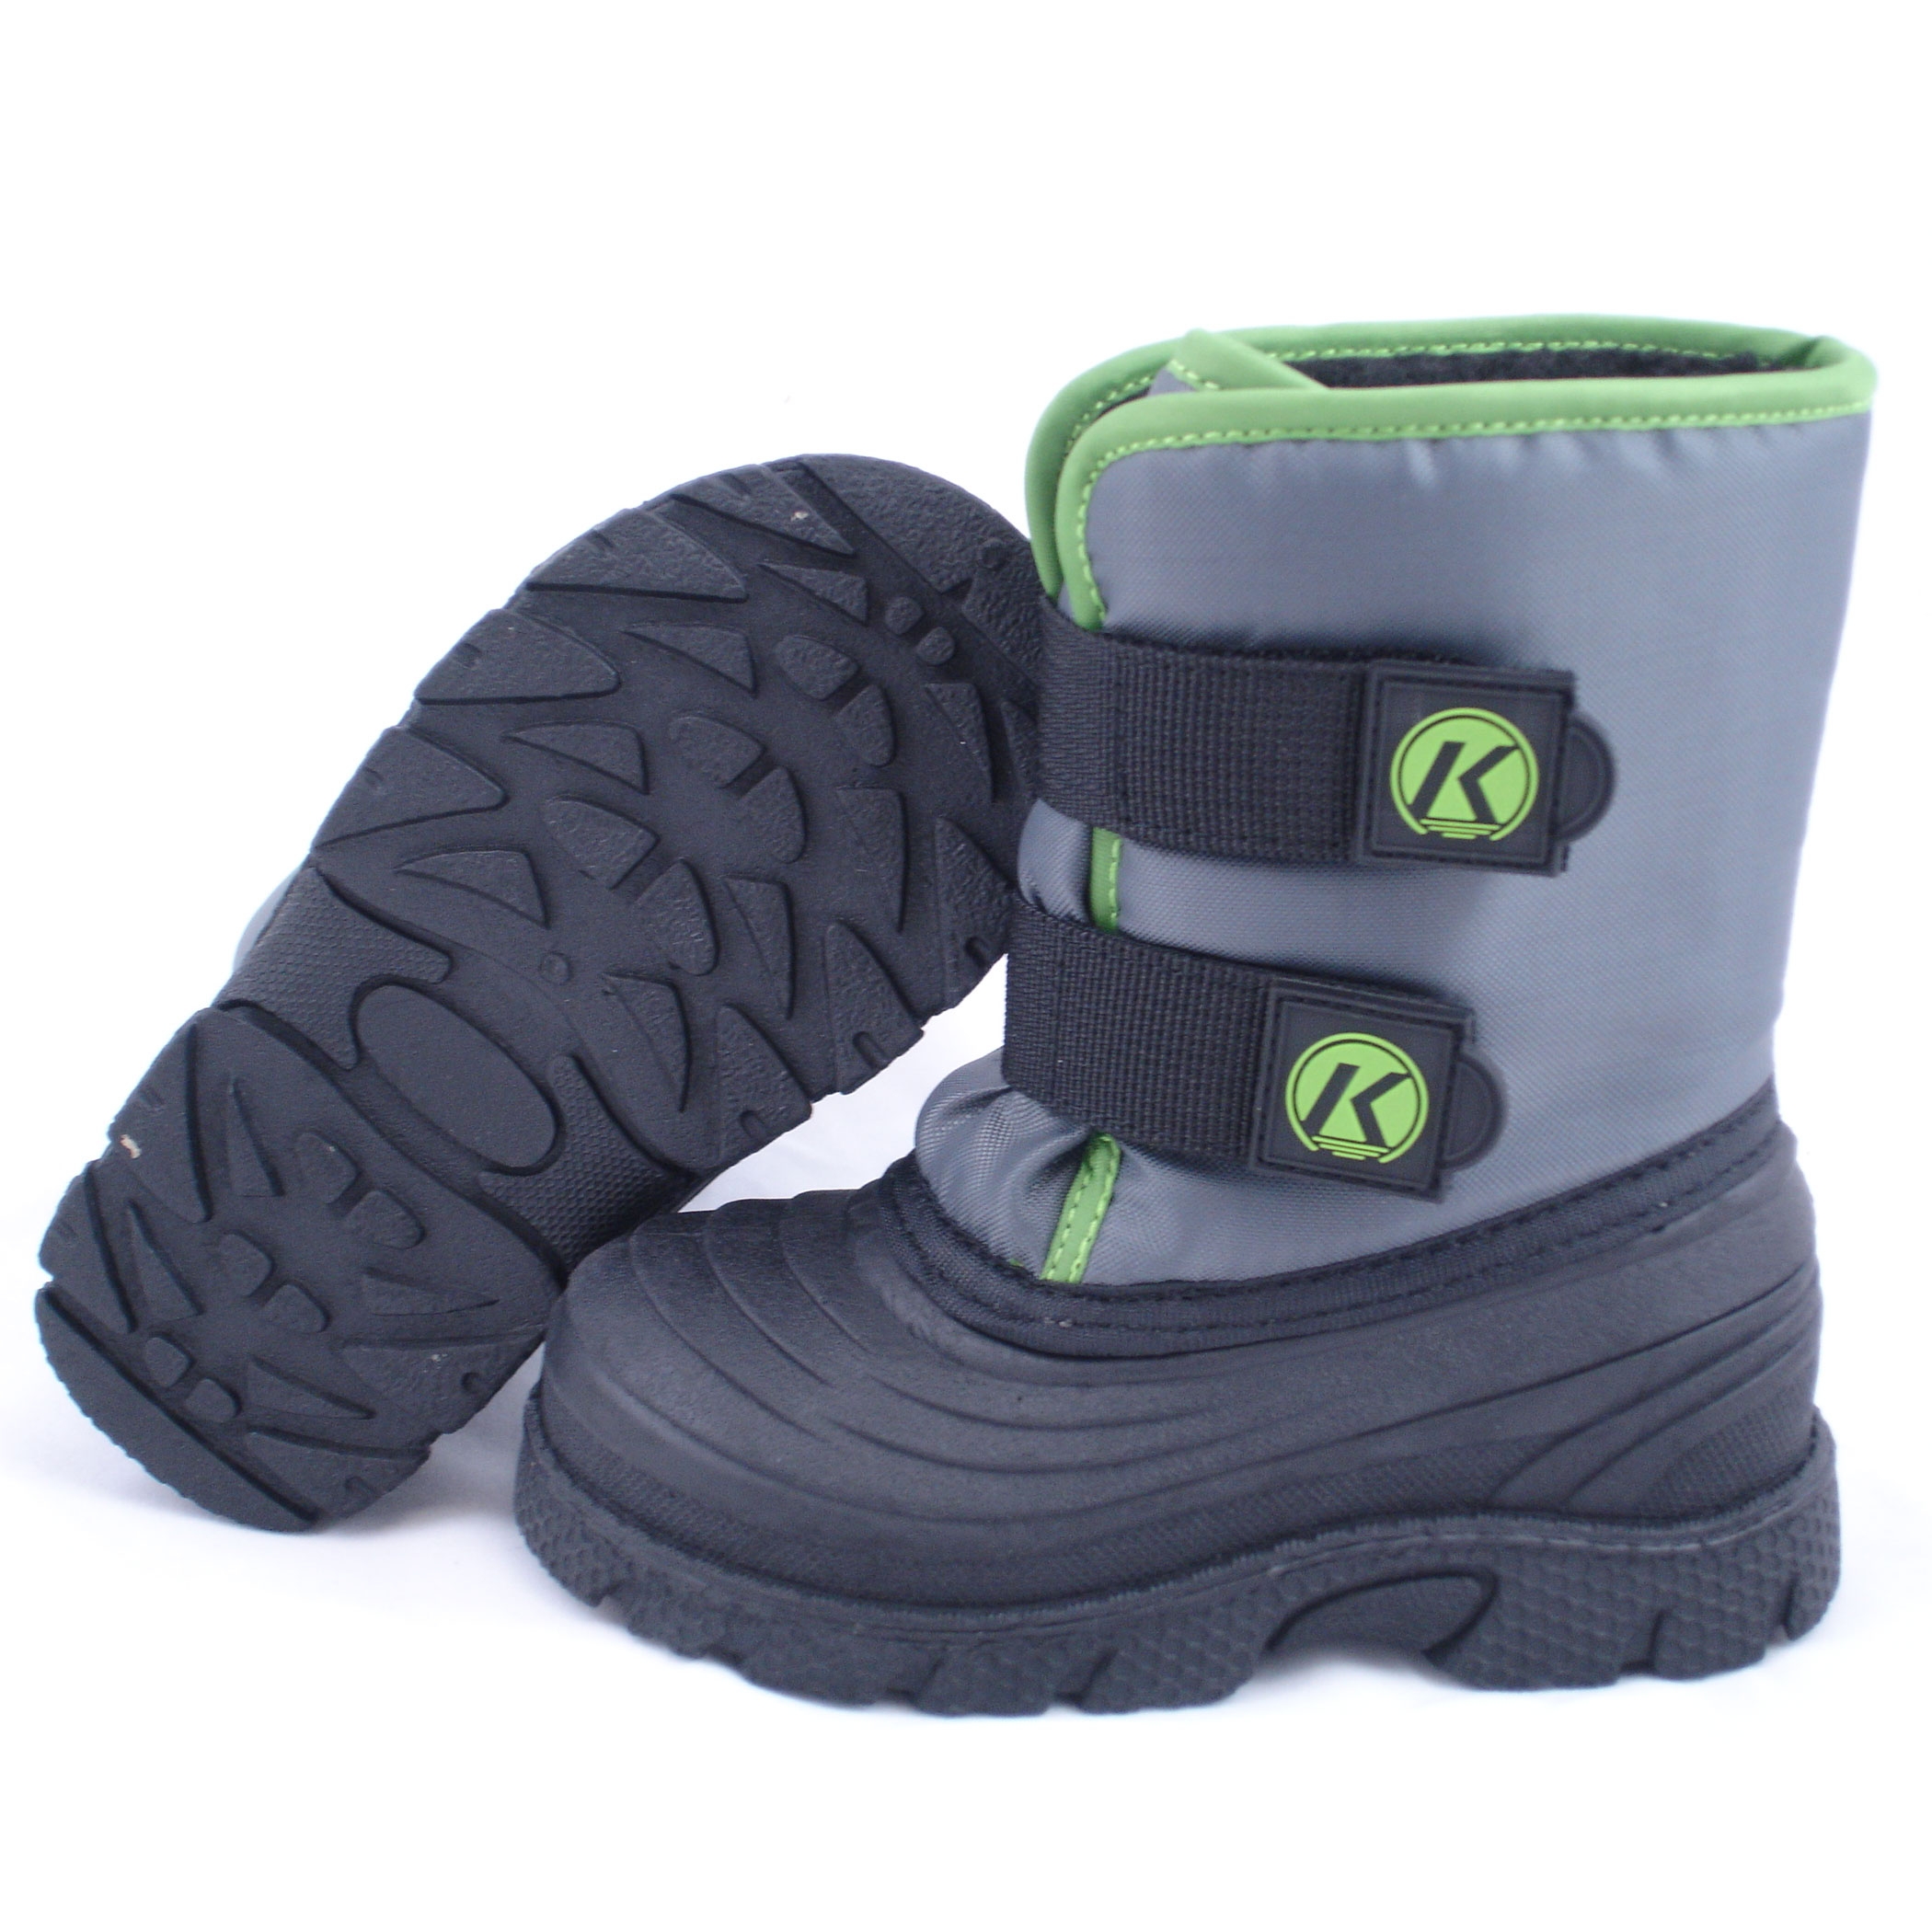 clipart of snow boots - photo #8